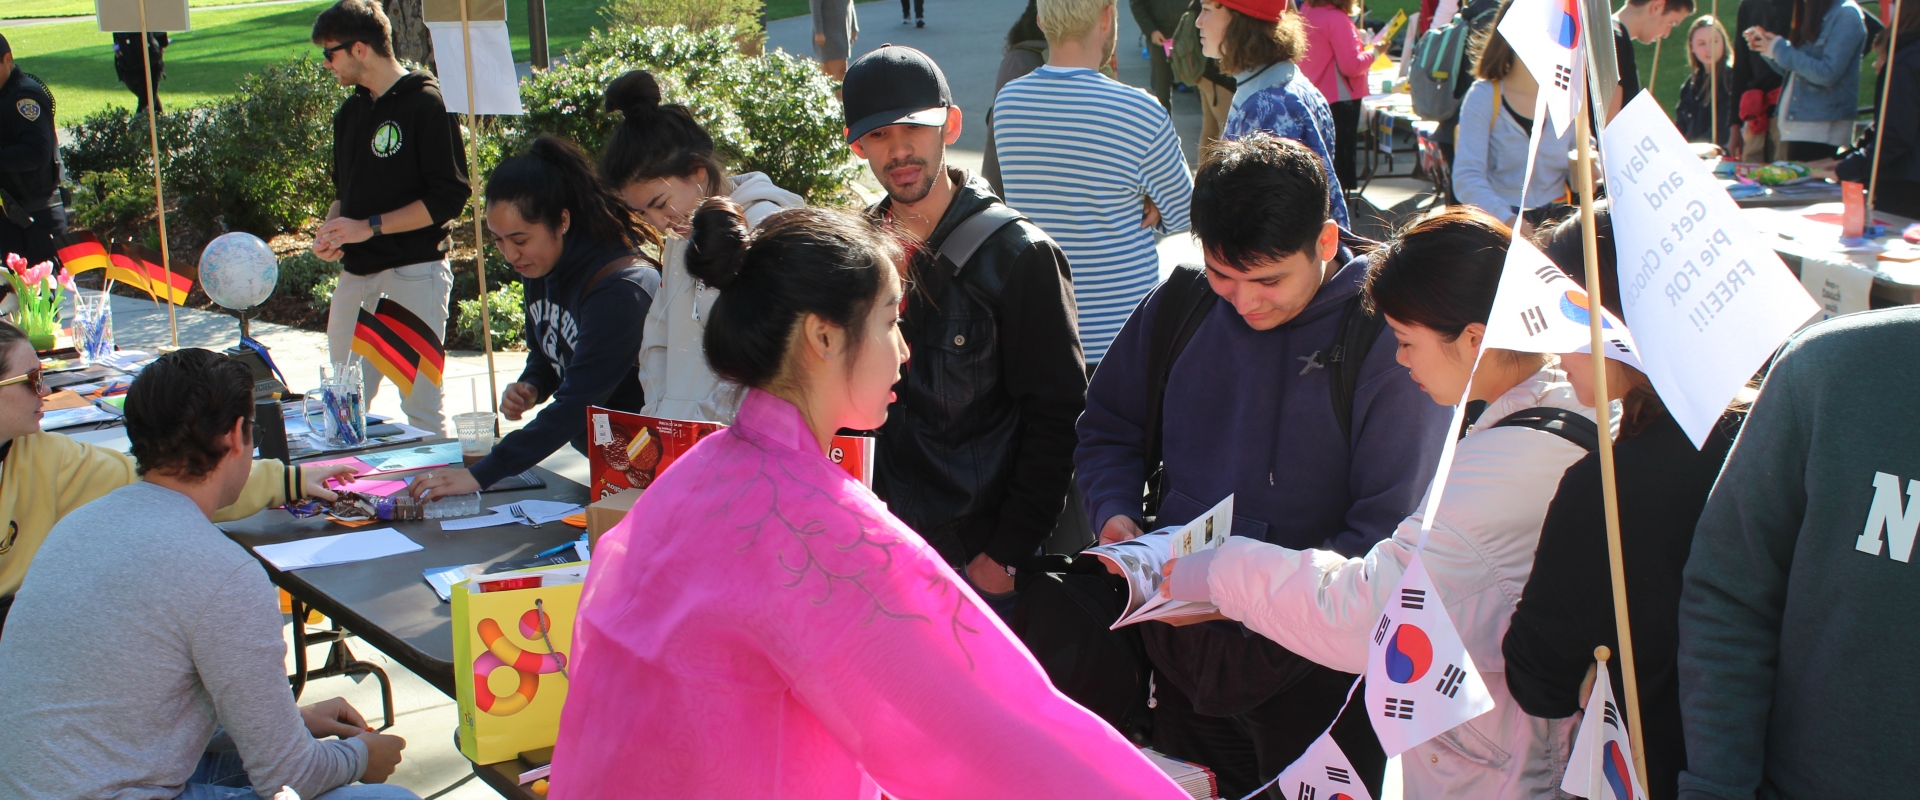 Students gathered around the Japan table at the study abroad fair.